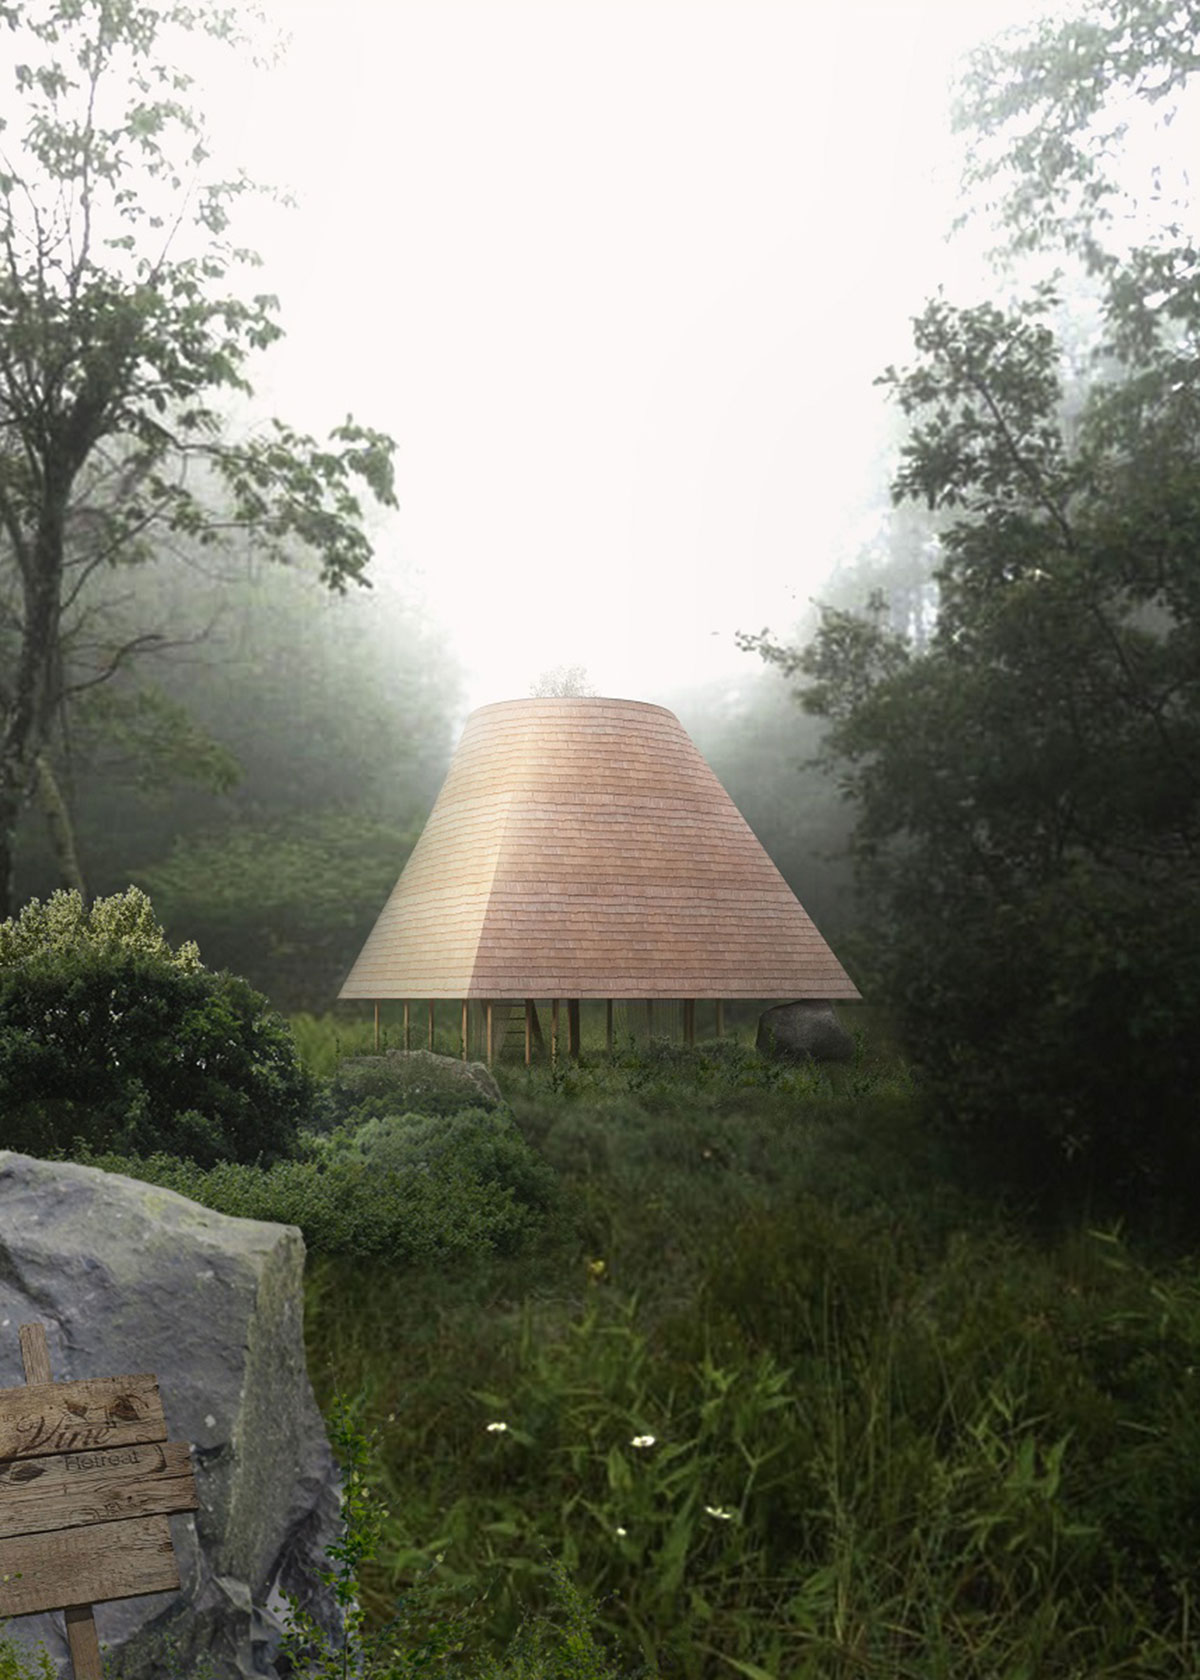 Result Announced: The Cambodia Remote Hideout Huts competition